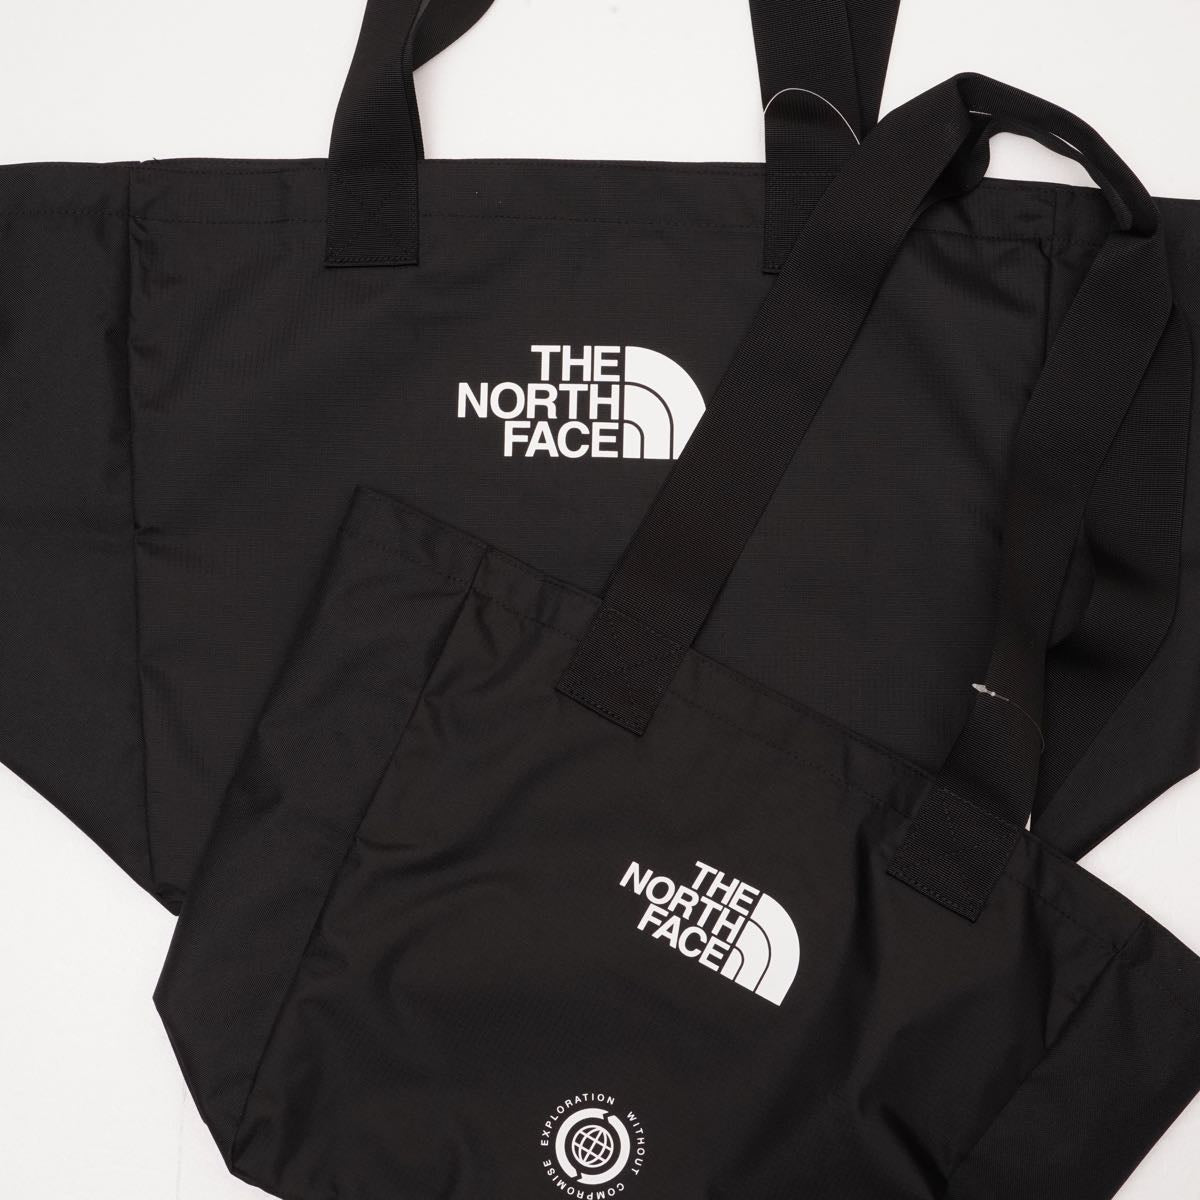 THE NORTH FACE TOTE BAG